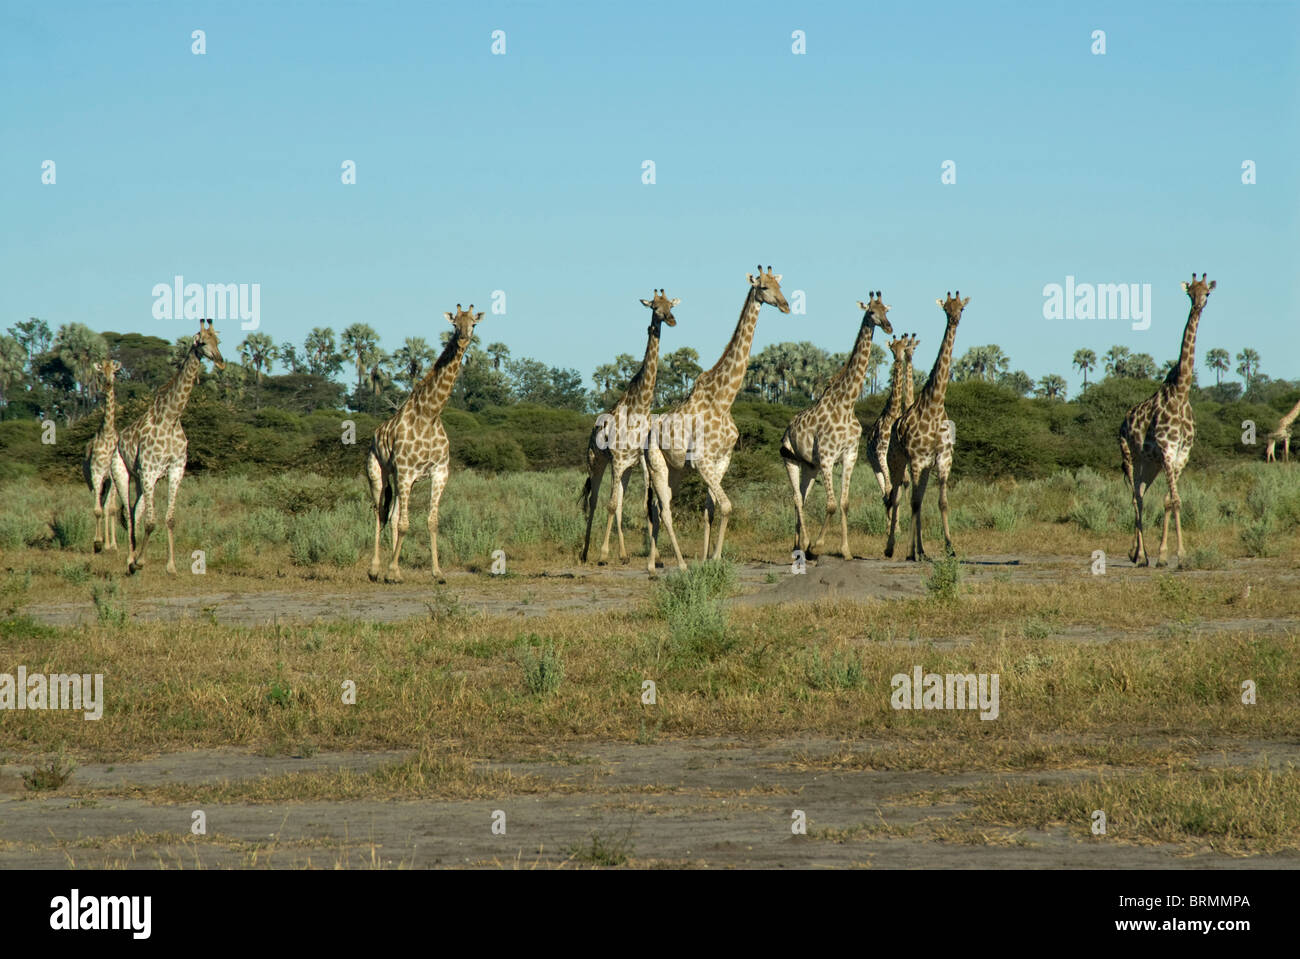 A herd of giraffe standing together in open grassland Stock Photo